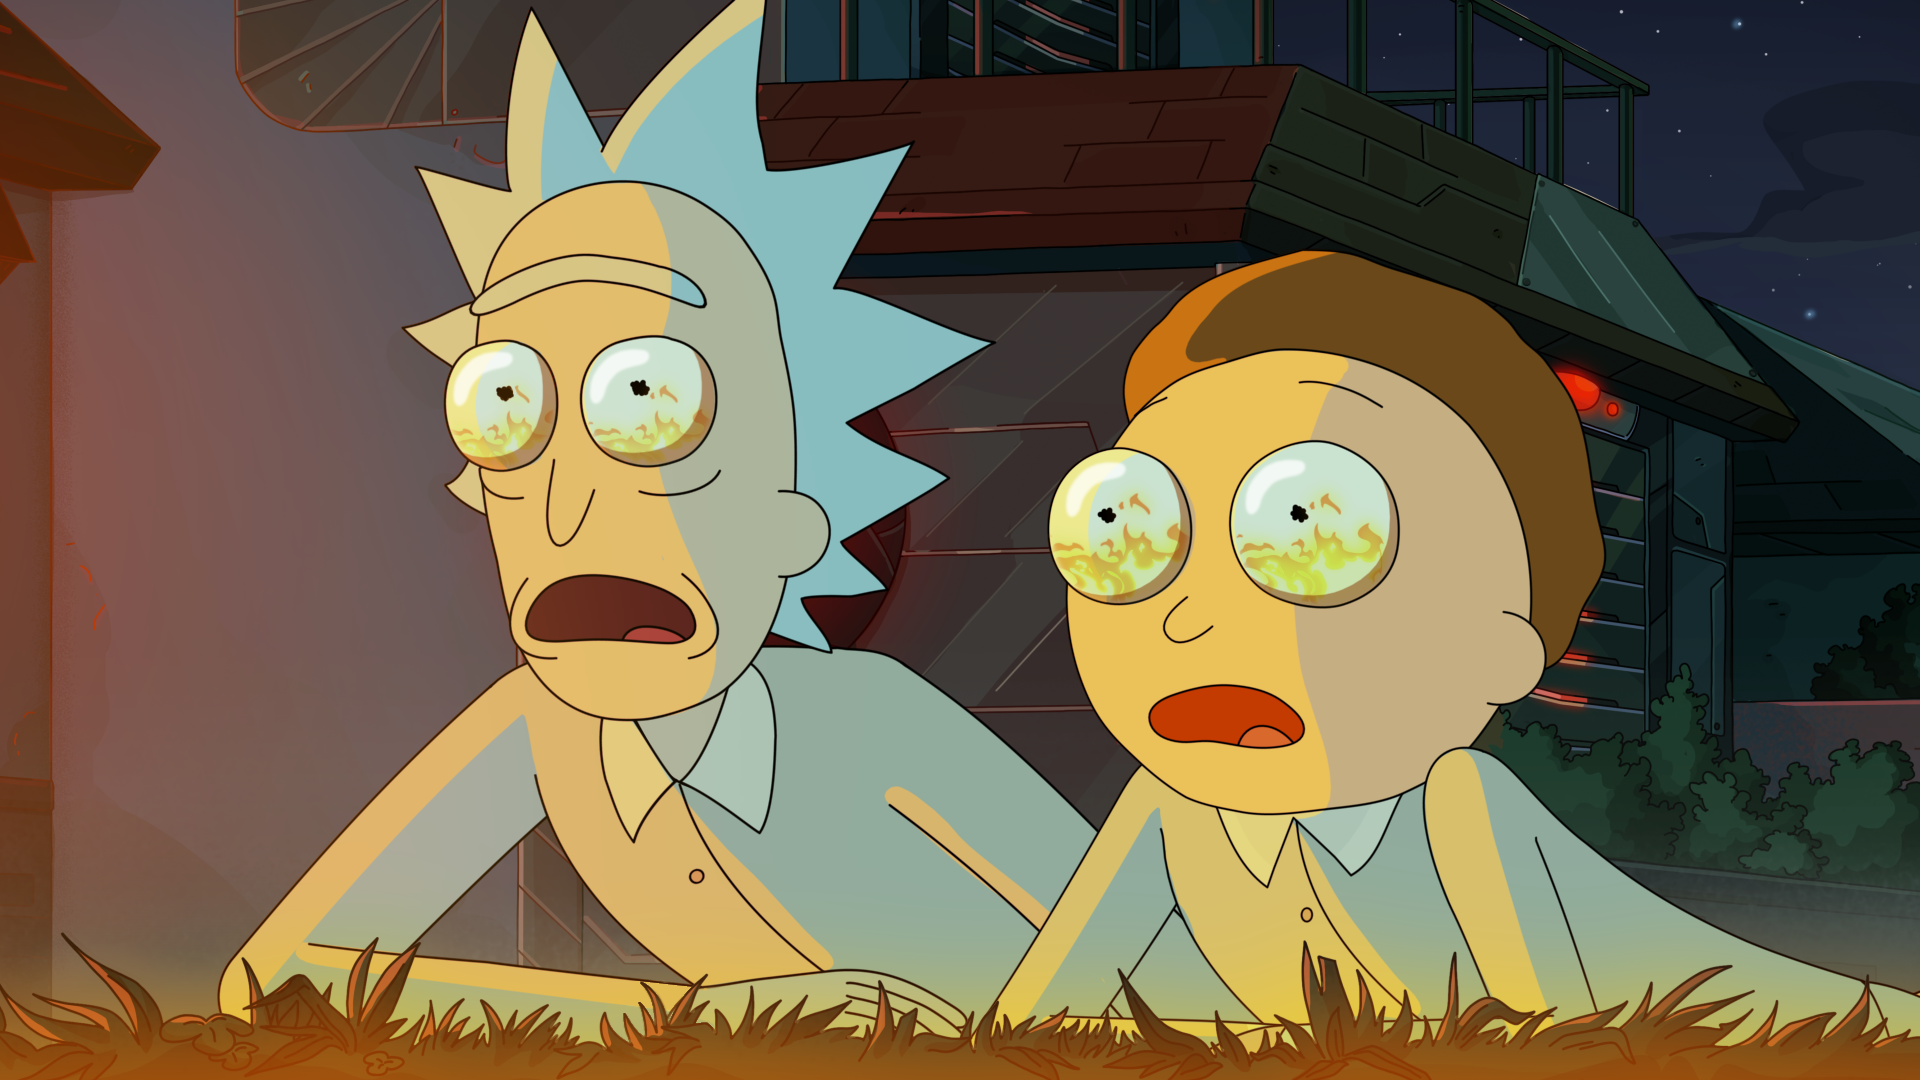 'Rick and Morty' Set to Launch a Dramatic New Season: Here's What Fans Need to Know